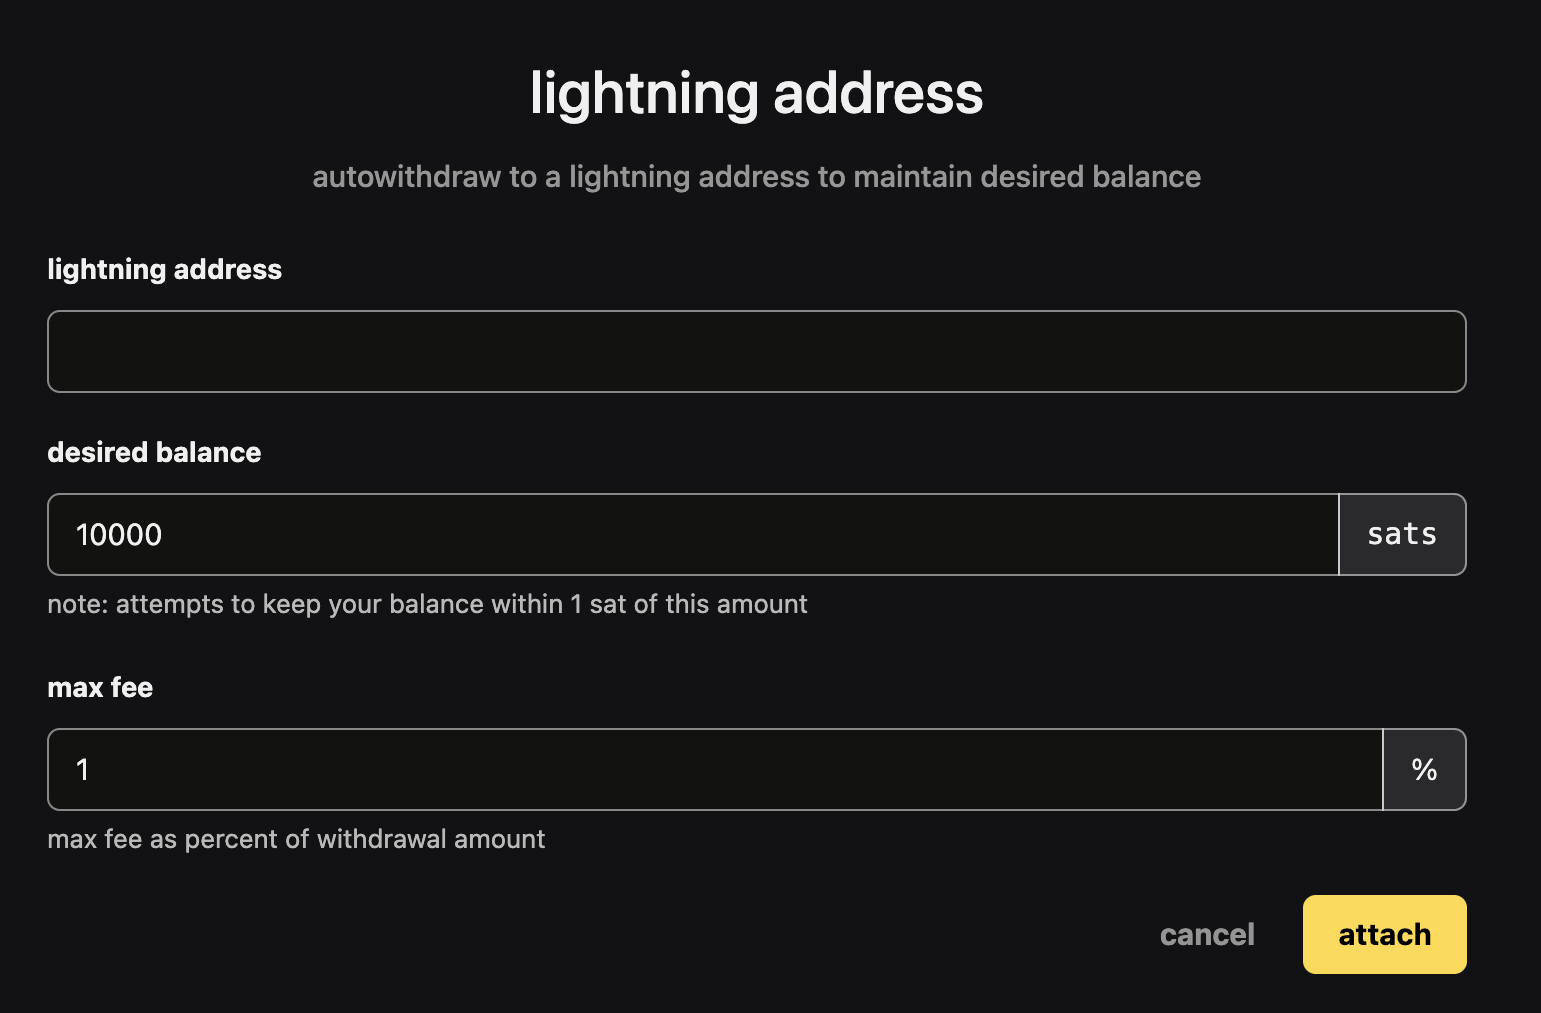 A screenshot of the form to attach a Lightning Address to your StackerNews account by inputing the address, desired balance and maximum fee to pay as a percent of the withdrawal amount.